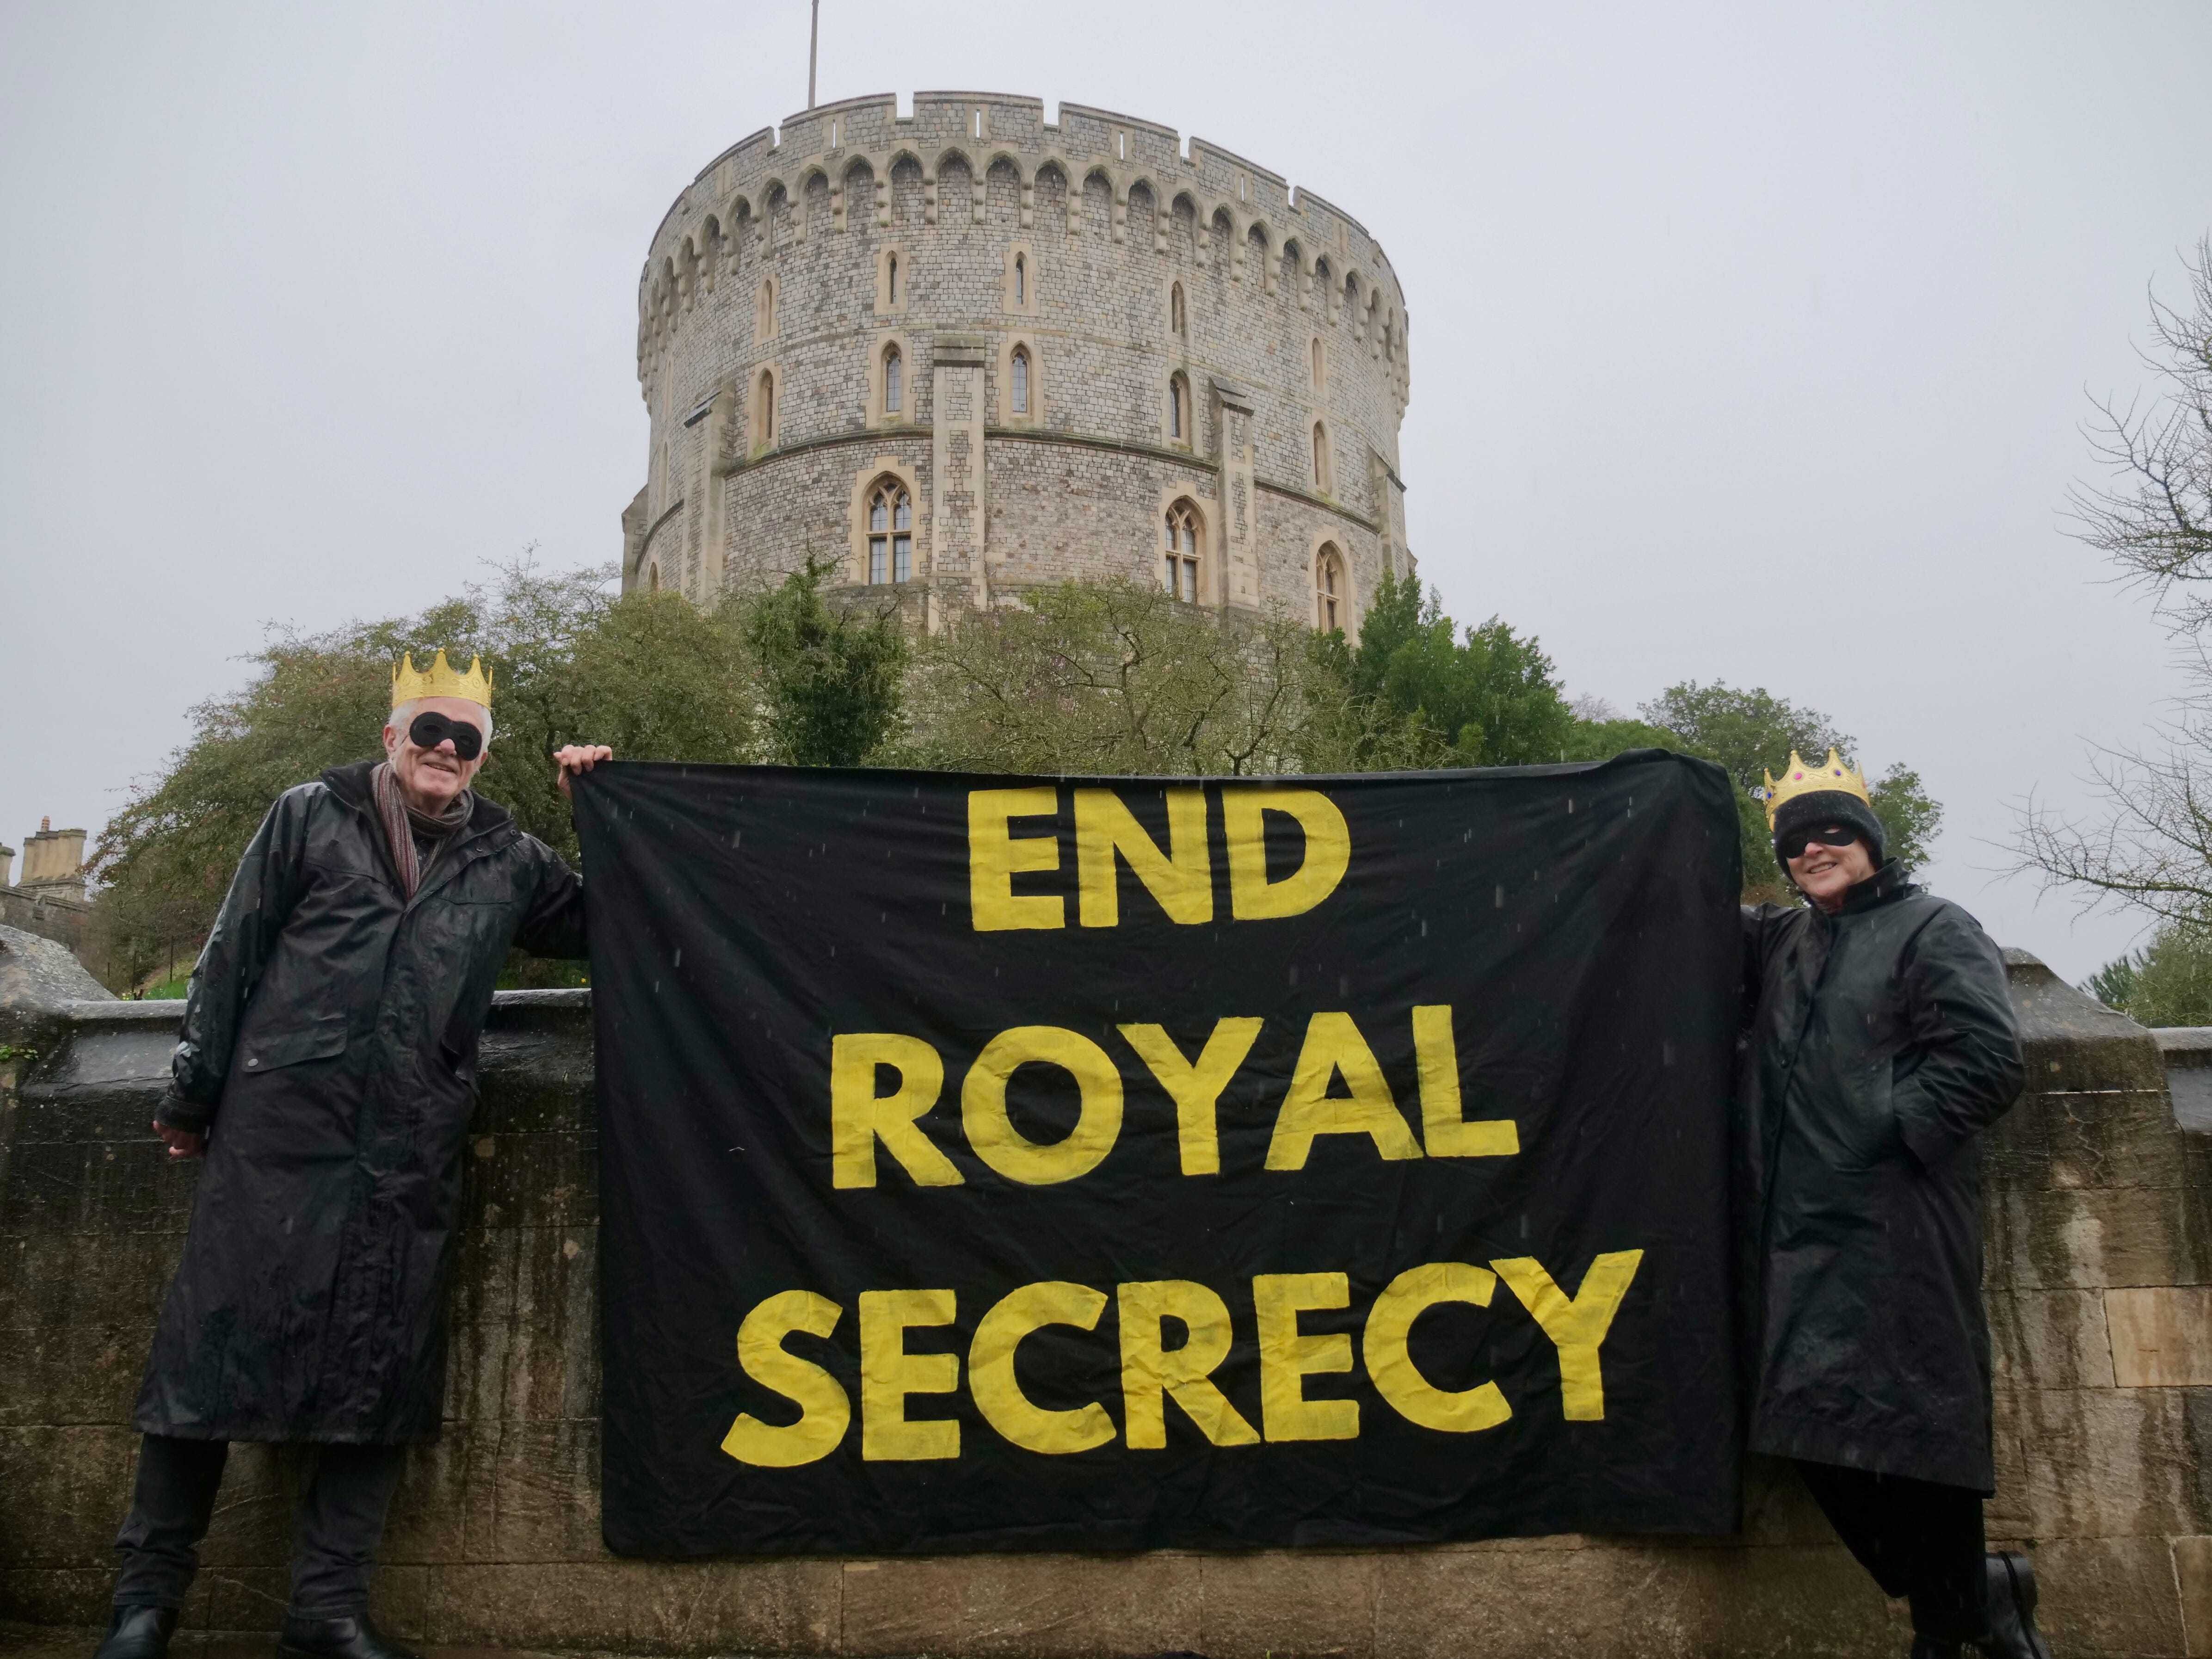 Protest in grounds of Windsor Castle over royal ‘secrecy’